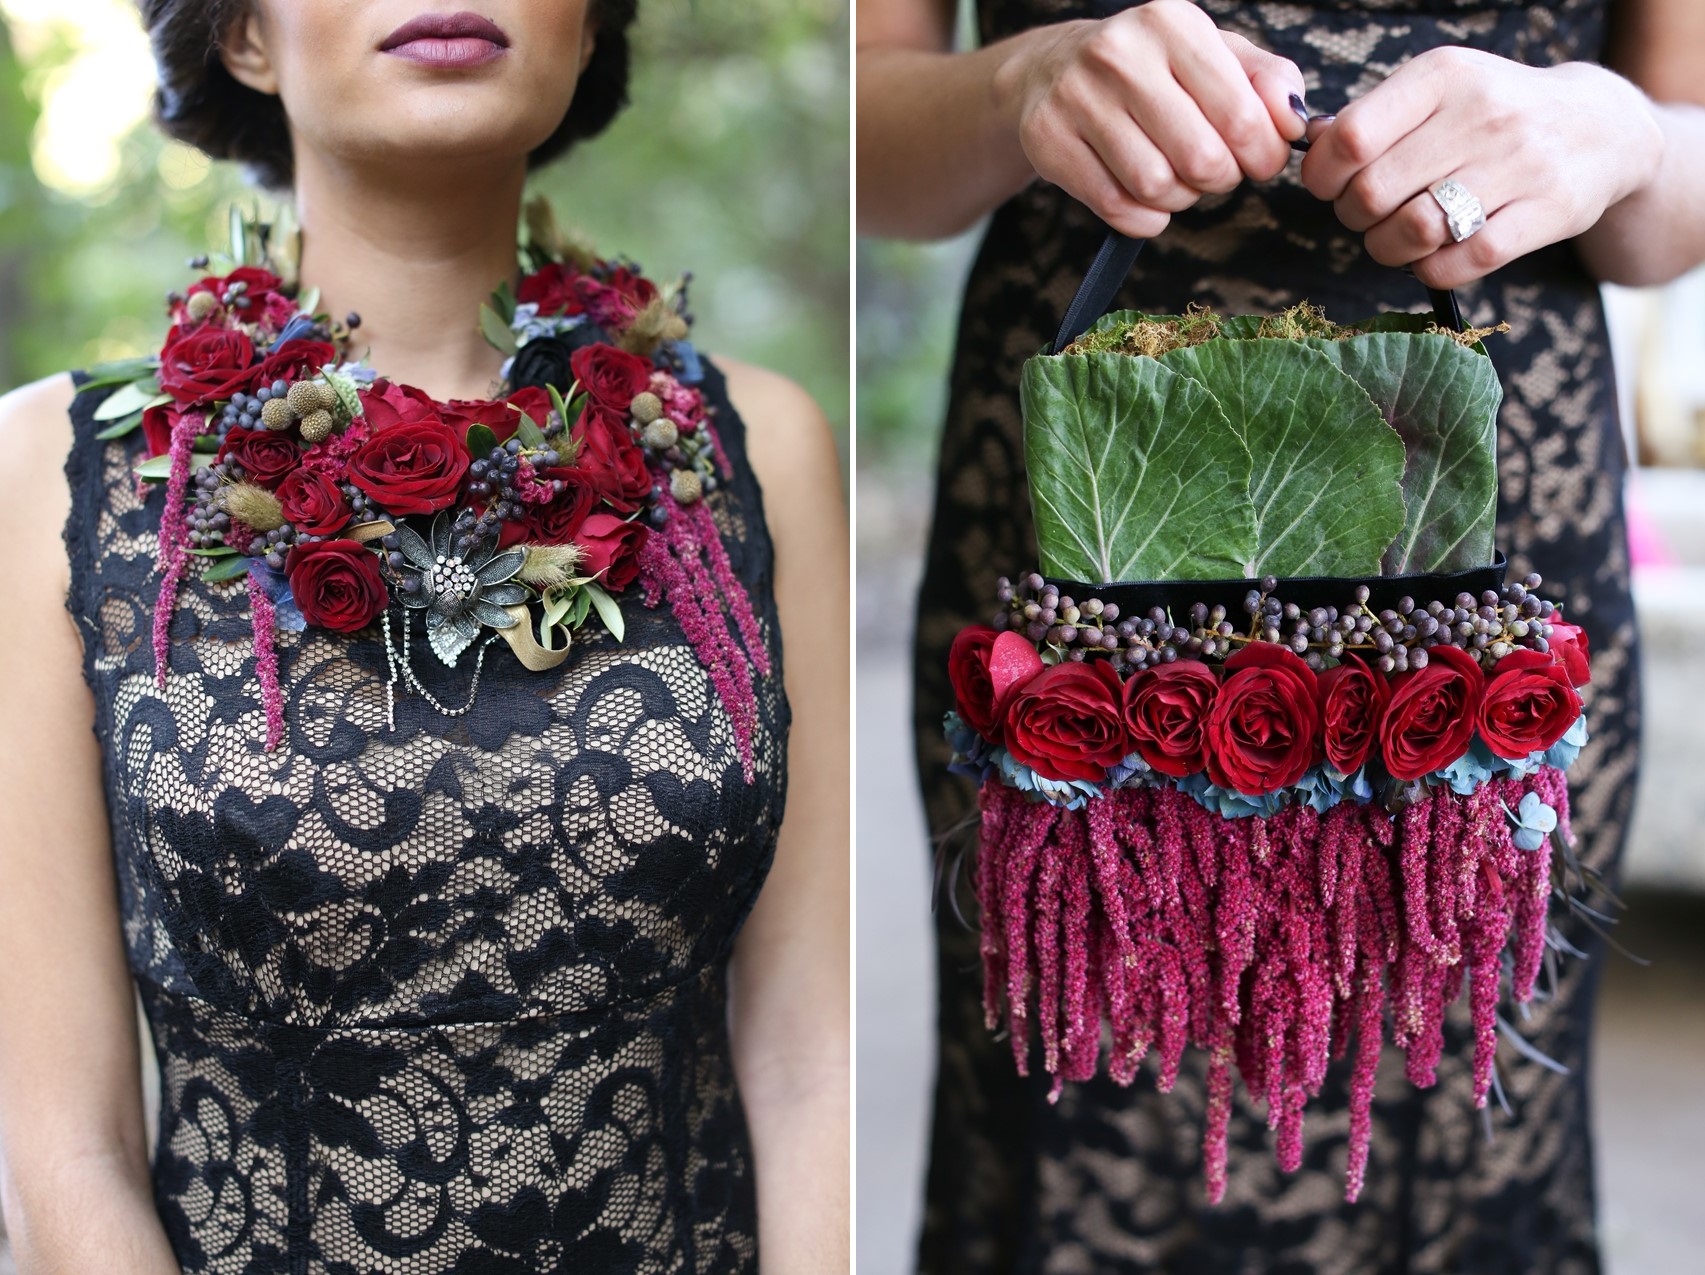 Floral Necklace & Handbag - Glamorous Wedding Inspiration with Opulent Fall Florals from Flora Fetish